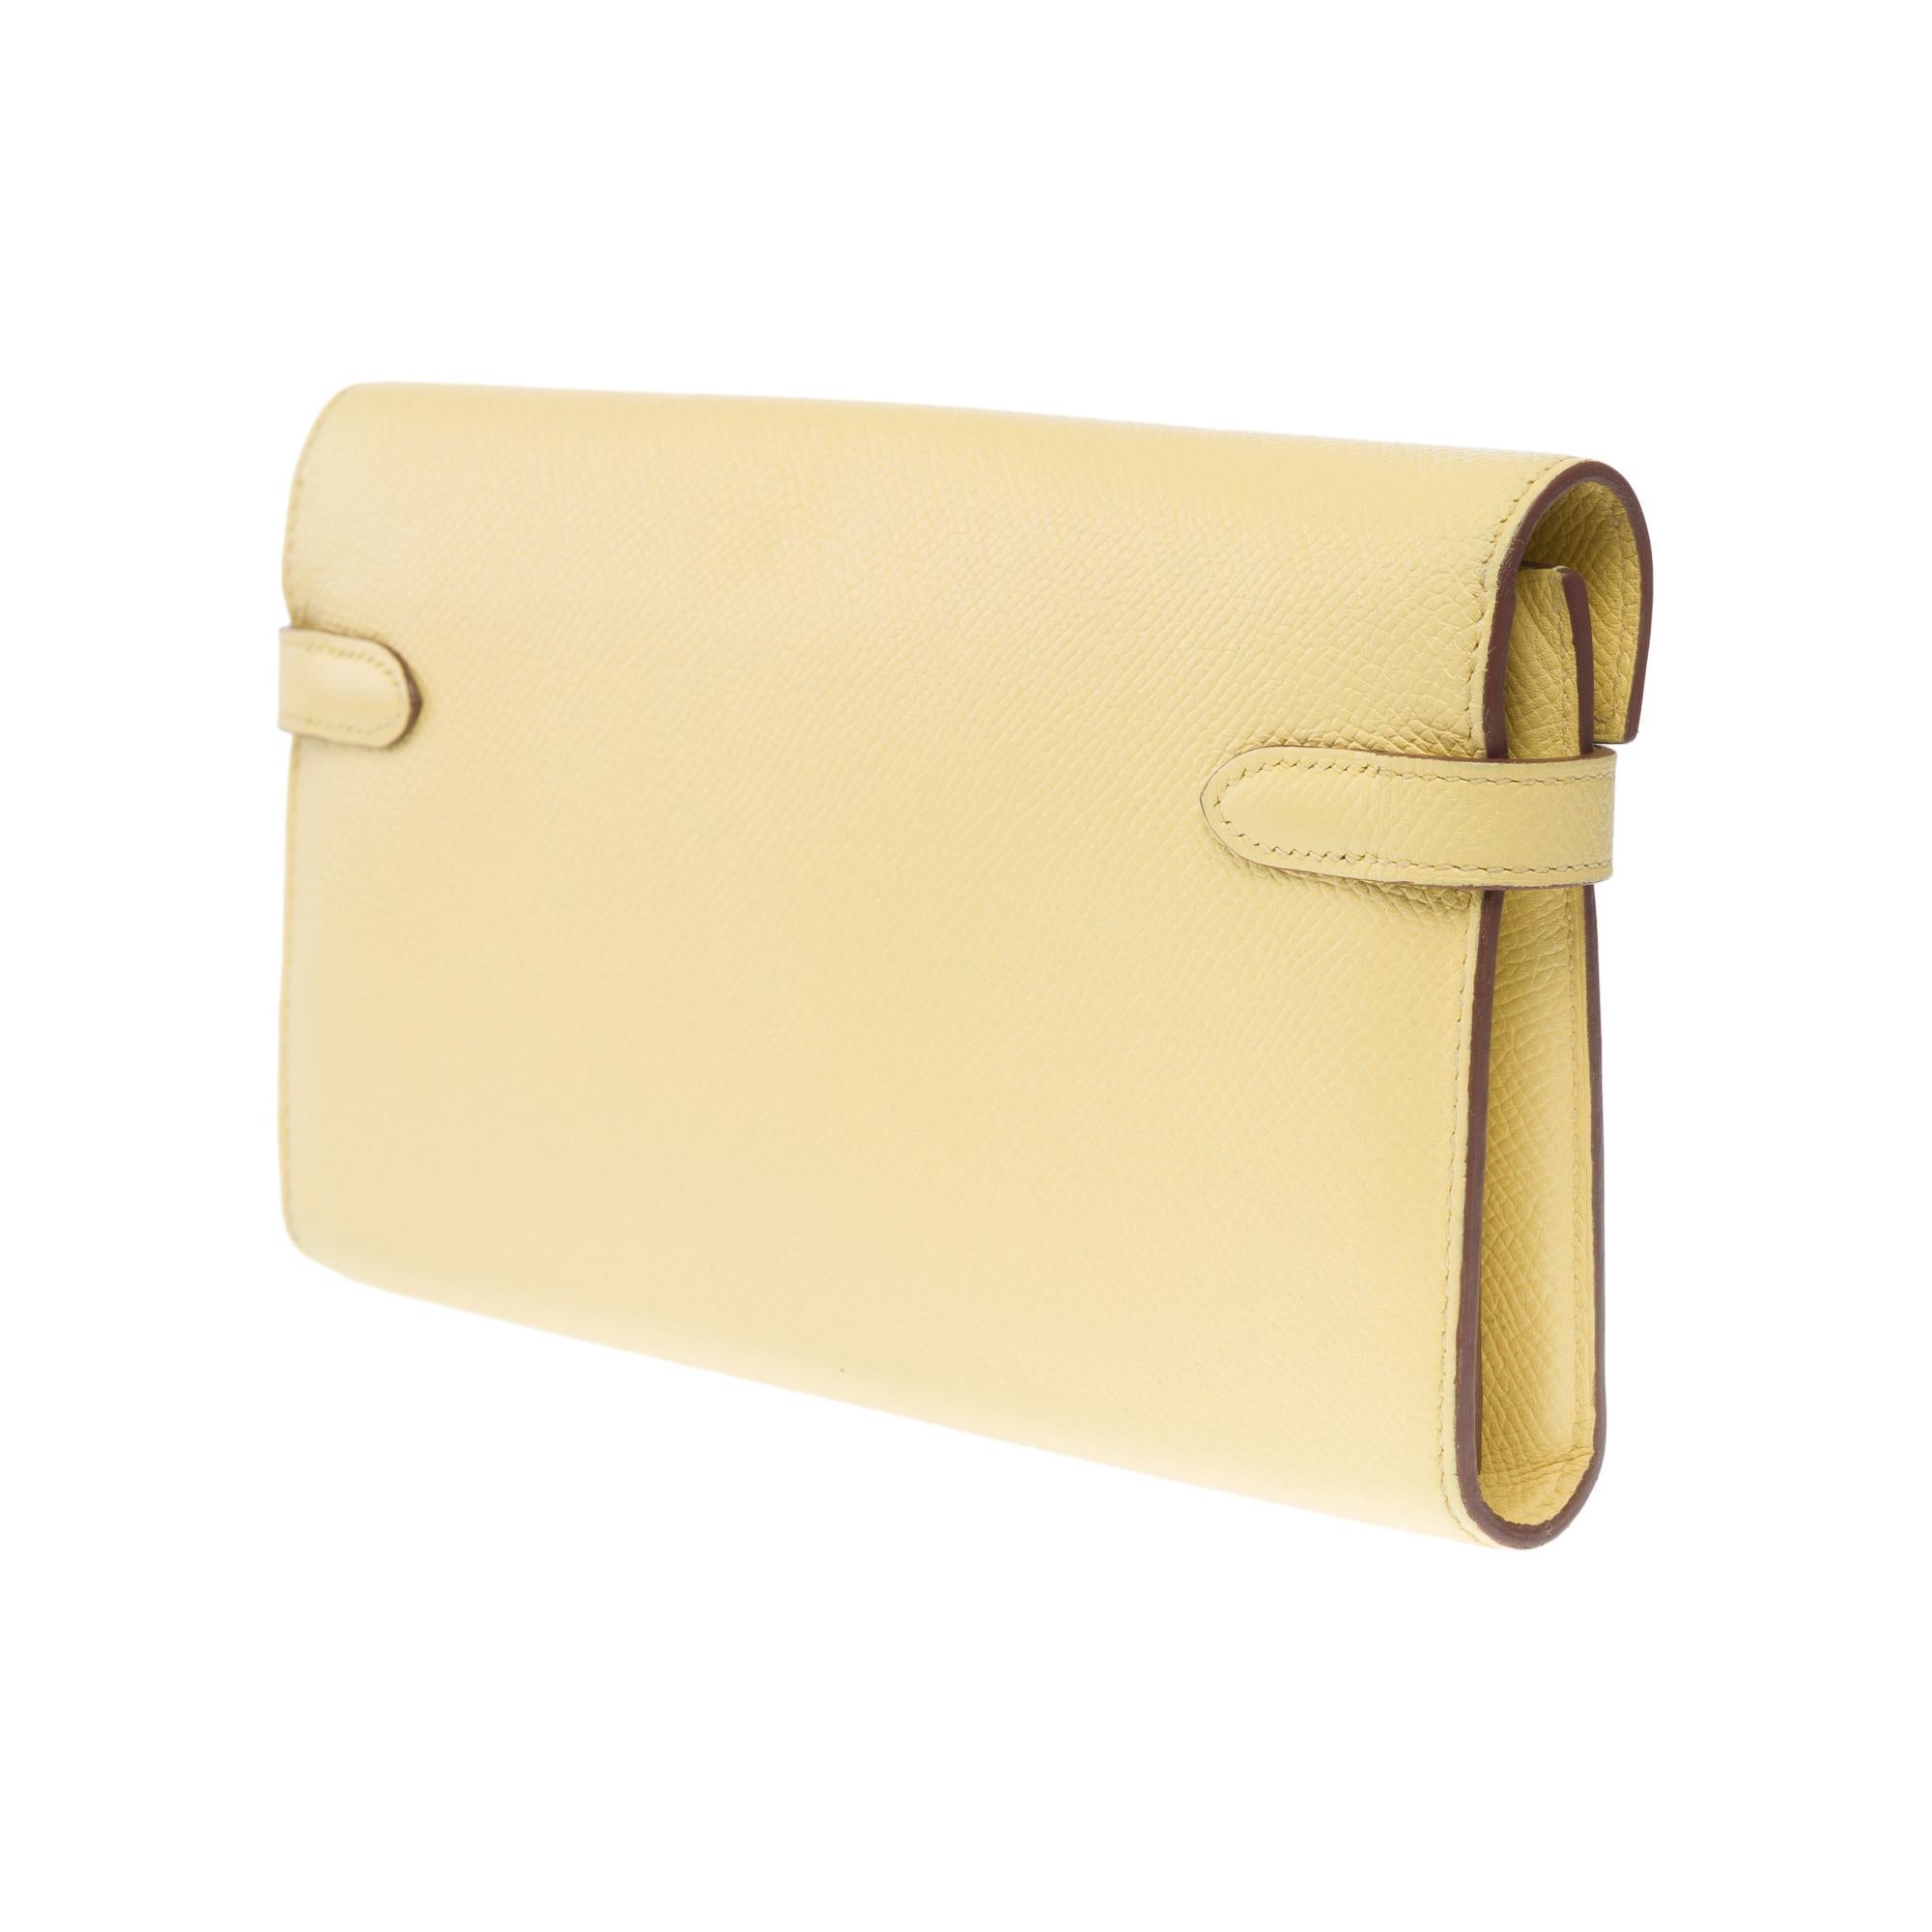 Beautiful Hermès Kelly Wallet in Yellow Poussin Epsom calf leather , GHW For Sale 1